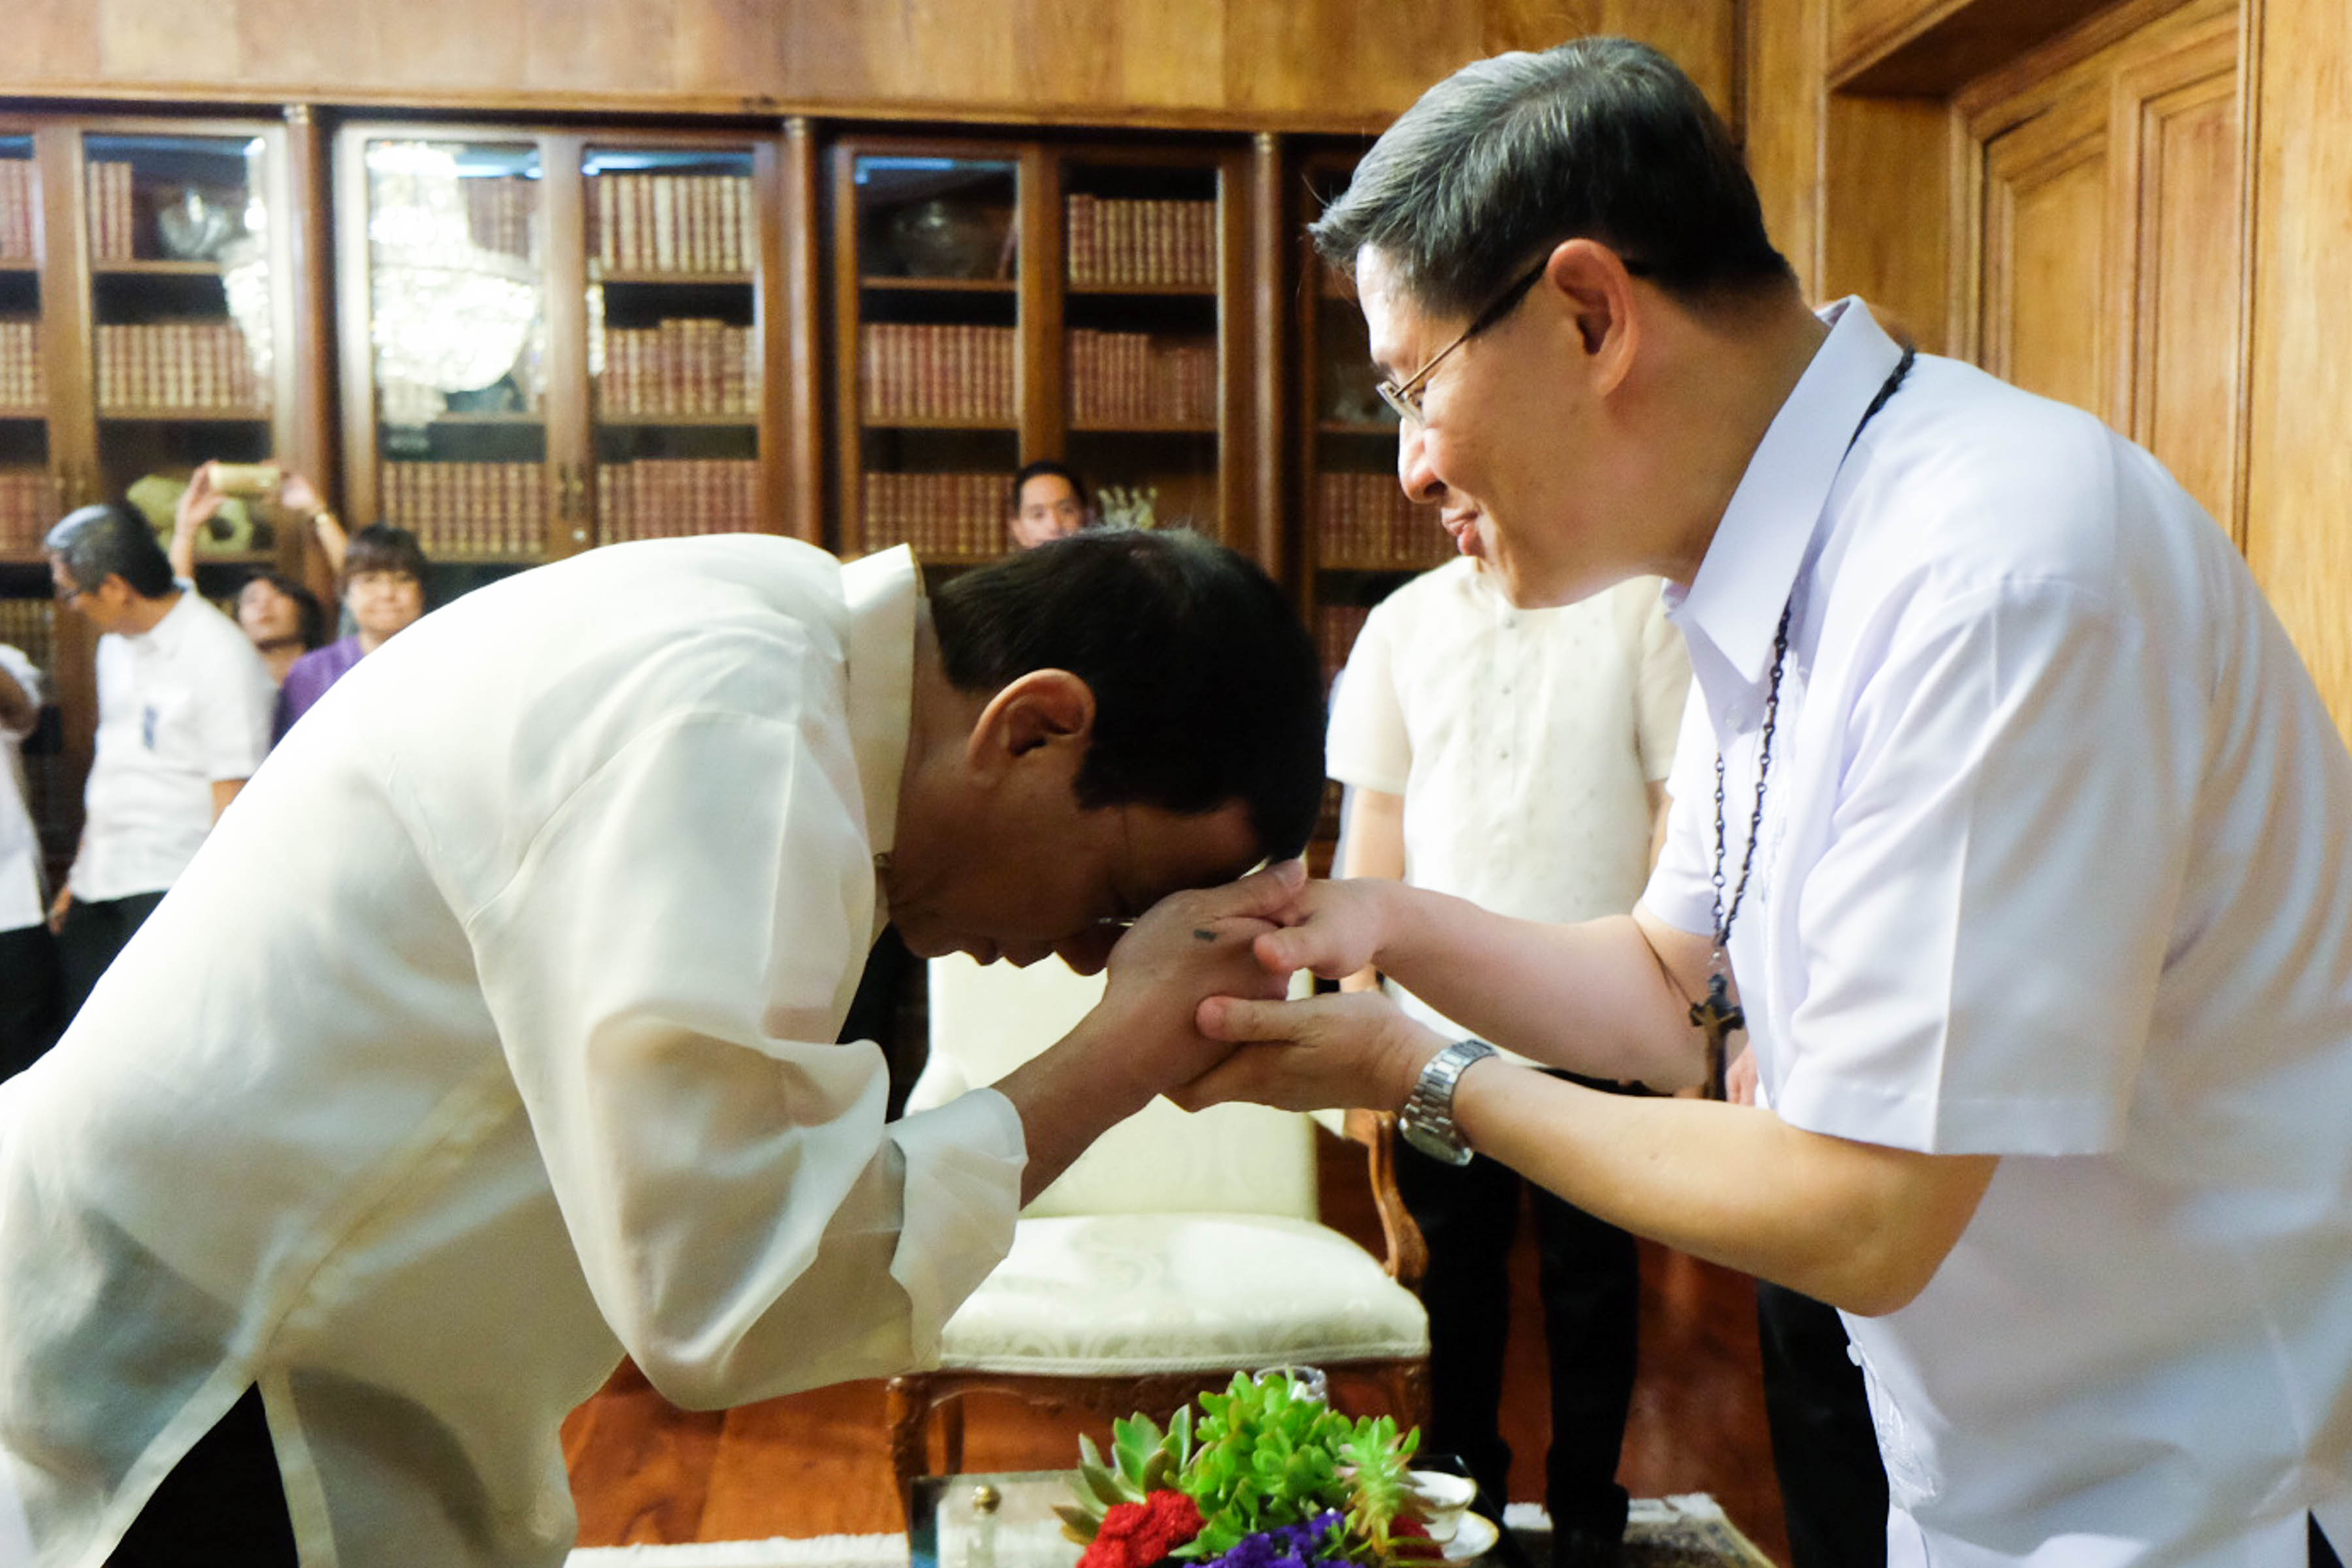 'MANO PO.' President Rodrigo Duterte places his forehead on Manila Archbishop Luis Antonio Cardinal Tagle's hand to show respect during a meeting at the Study Room of Malacañang Palace on July 19, 2016. File photo by Kiwi Bulaclac/PPD 